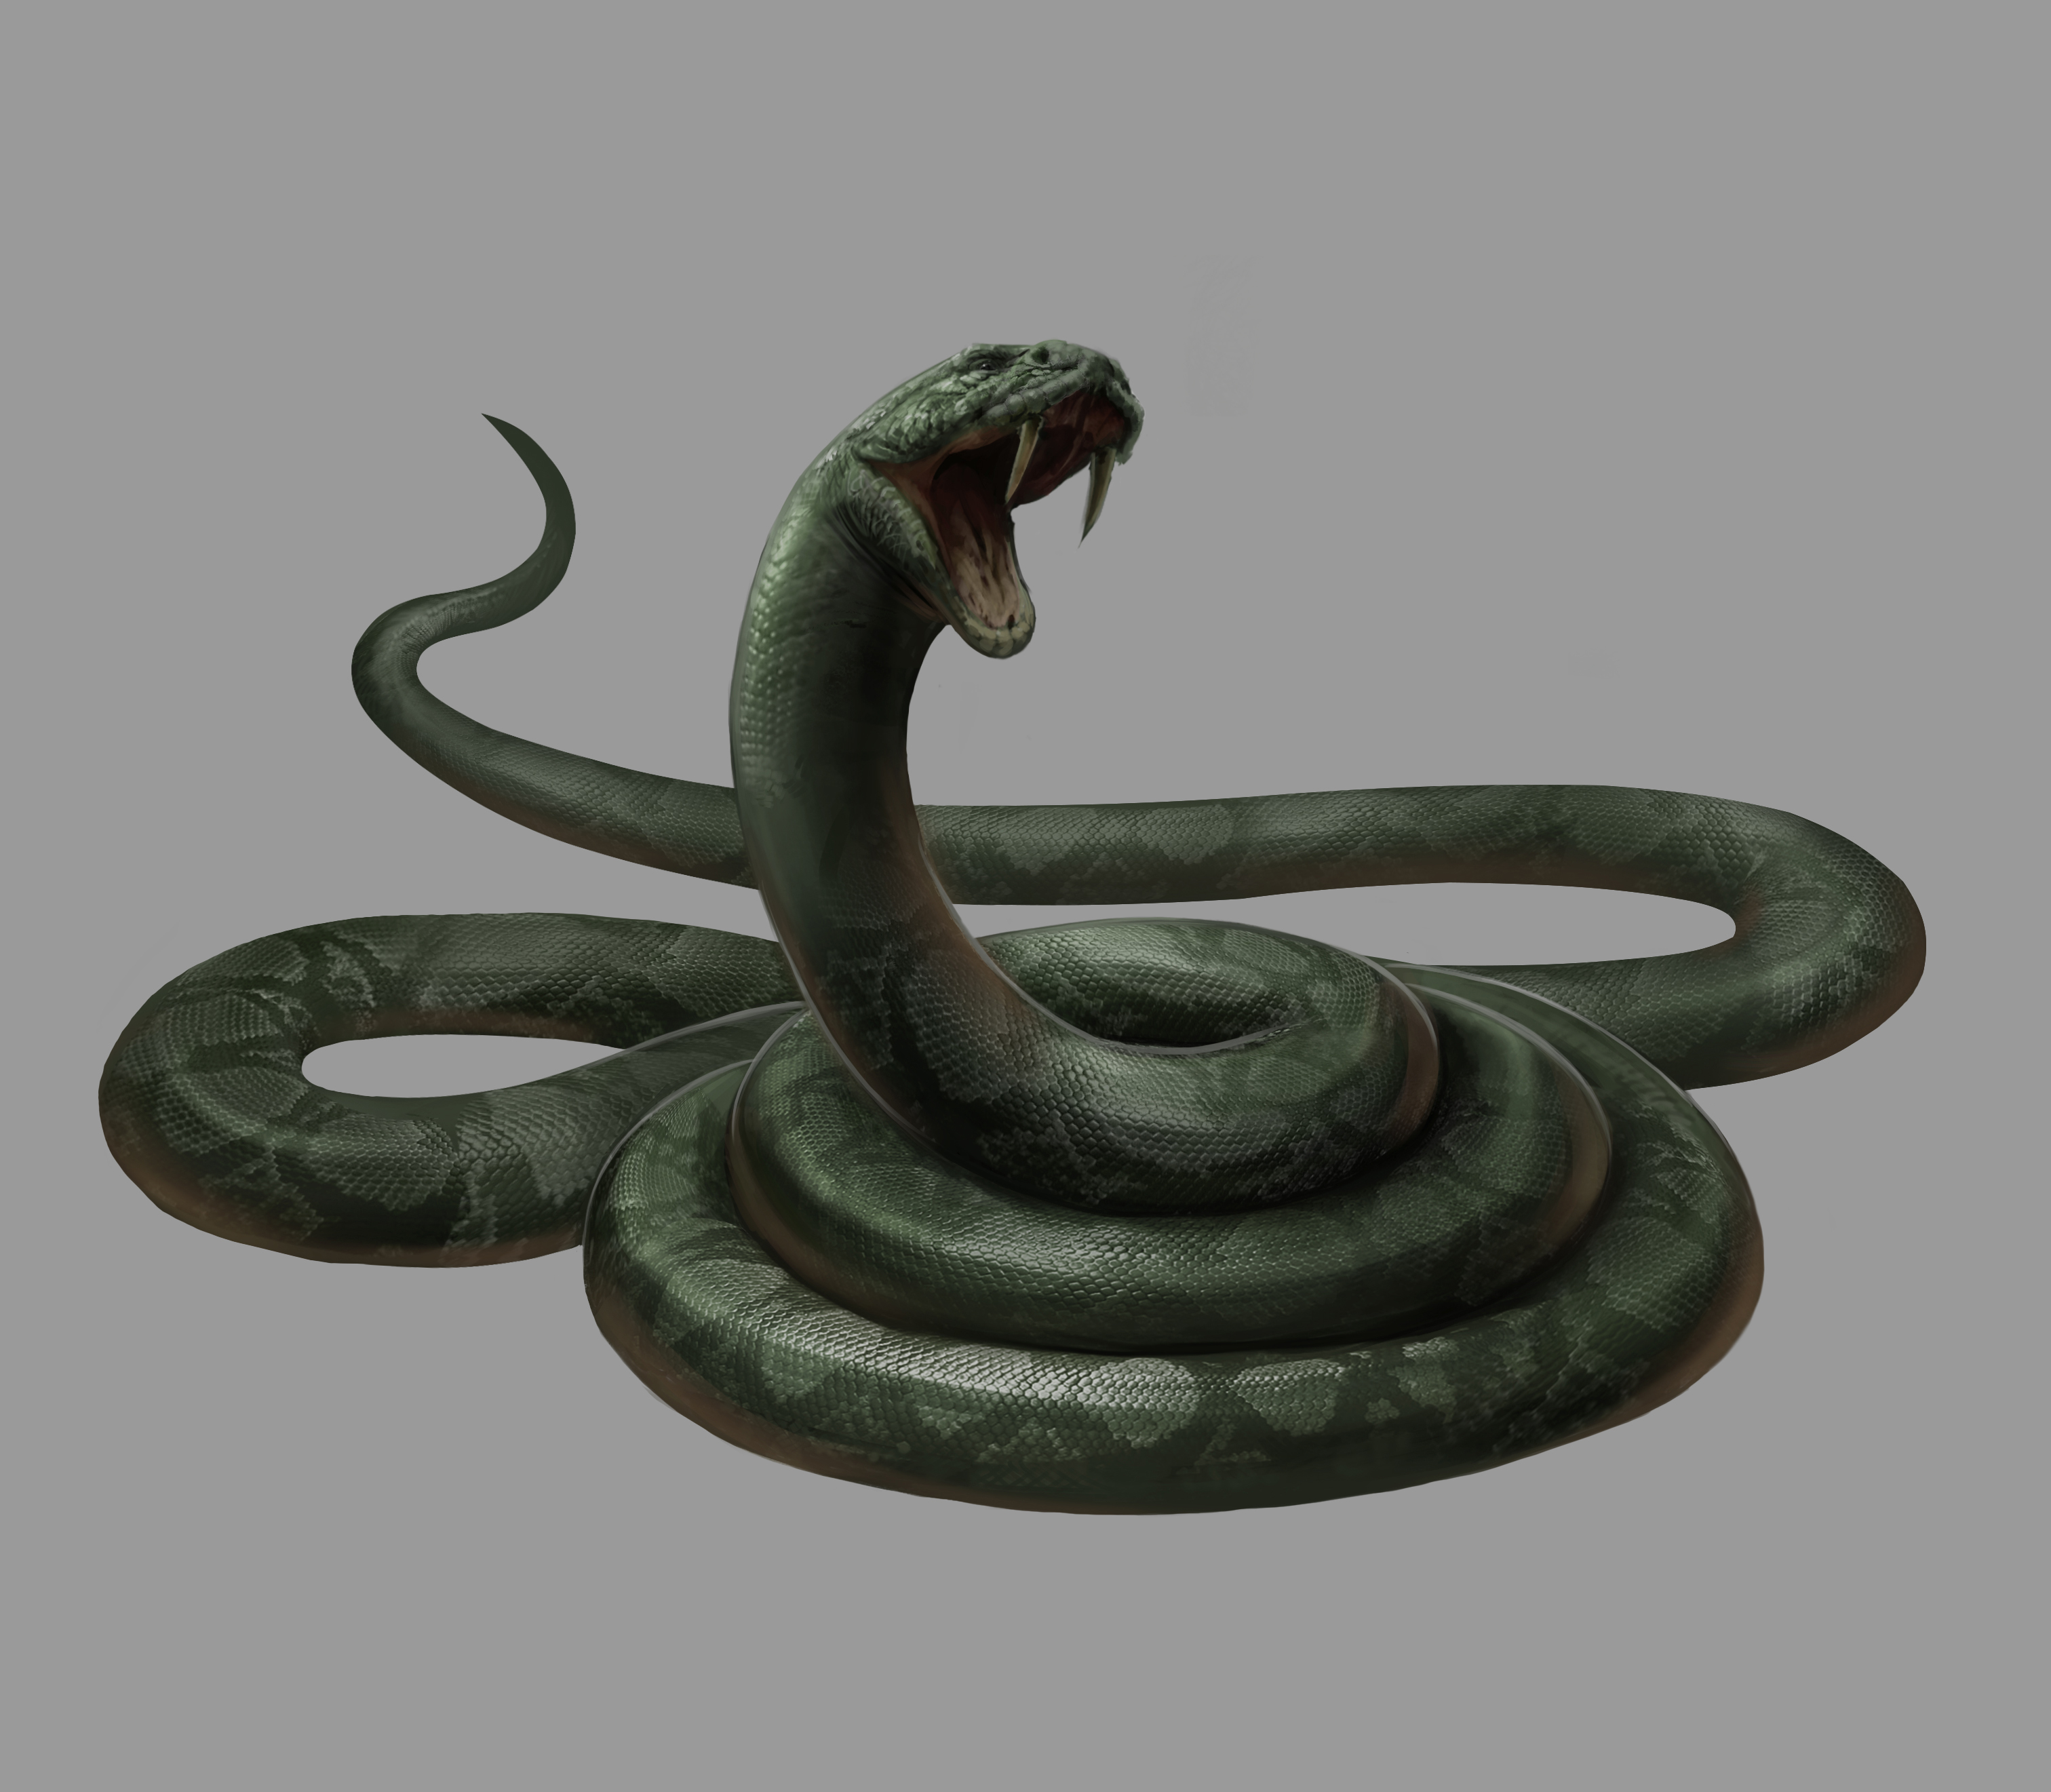 Nagini: The Enigmatic Snake and Horcrux of Lord Voldemort 2